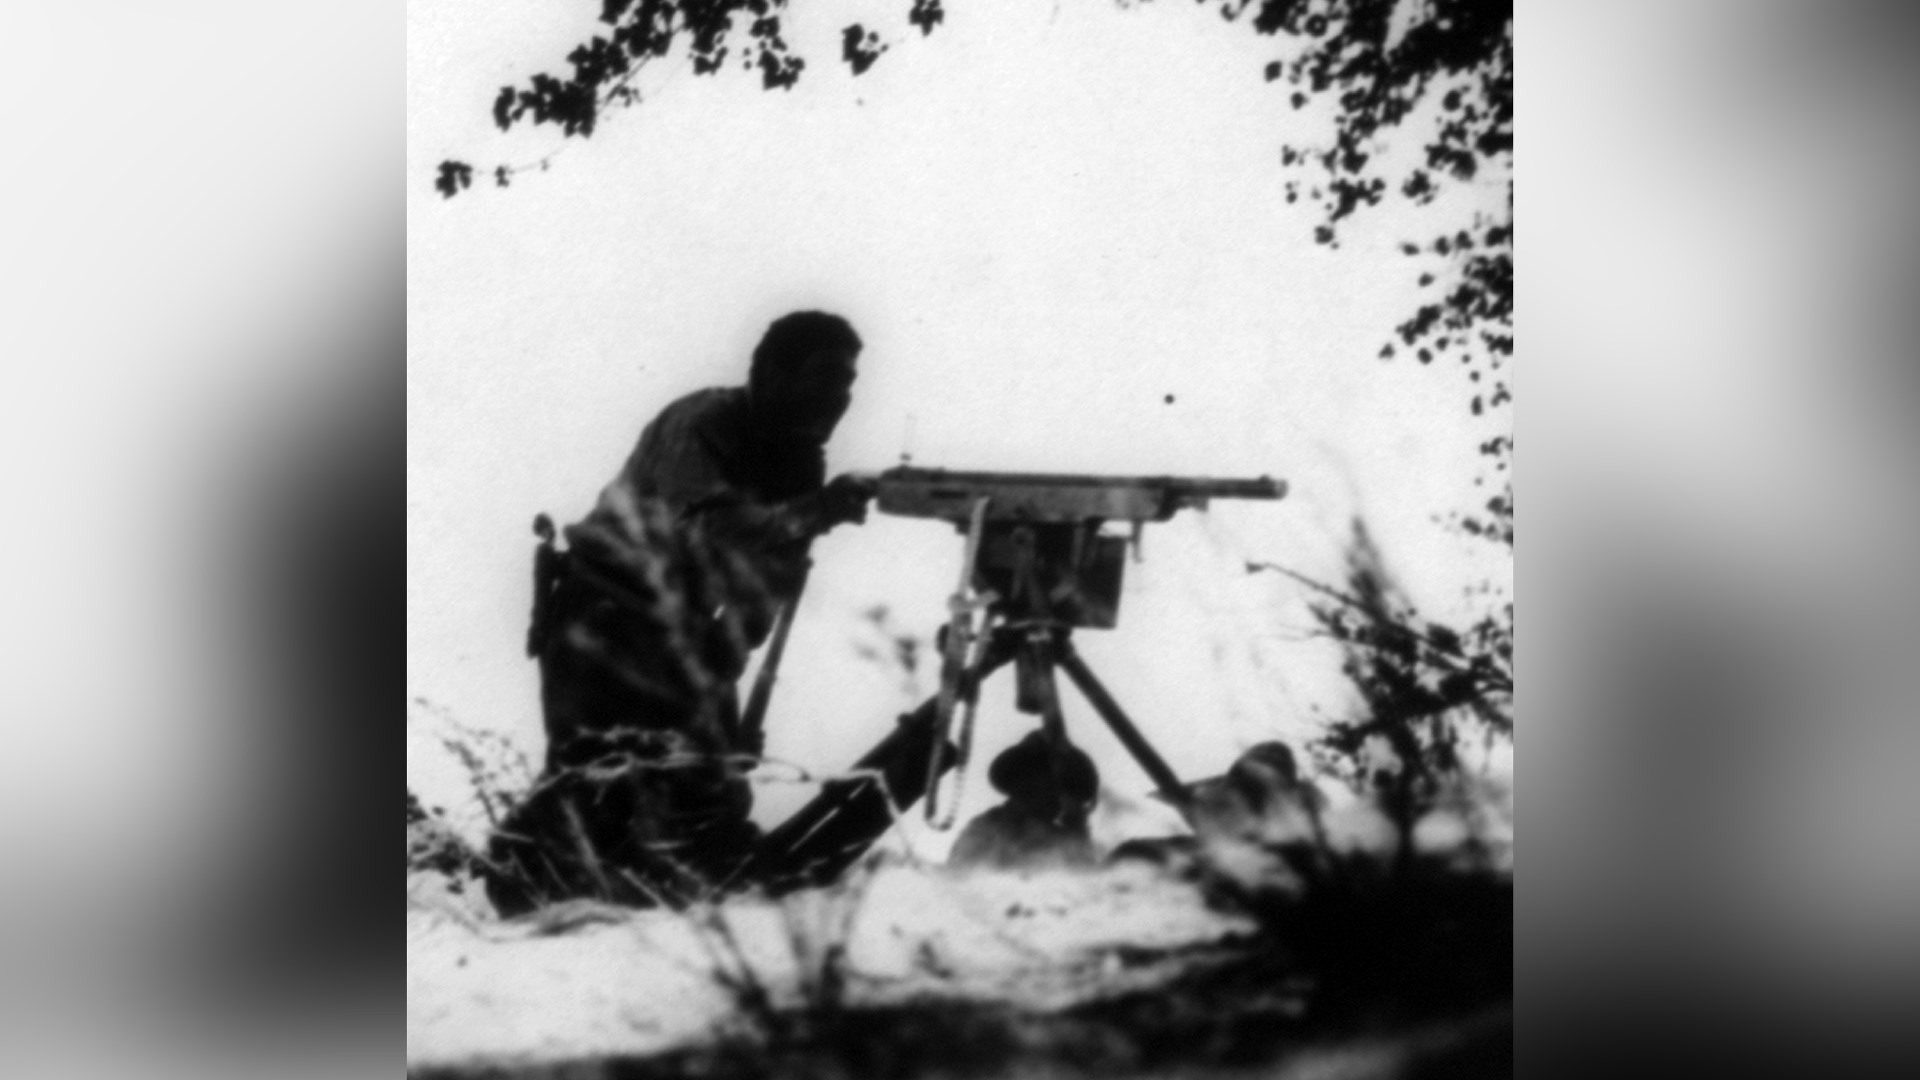 M1895 machine gun used by Mexican revolutionaries. Pancho Villa’s “Division of the North” is thought to have acquired at least two of these guns.